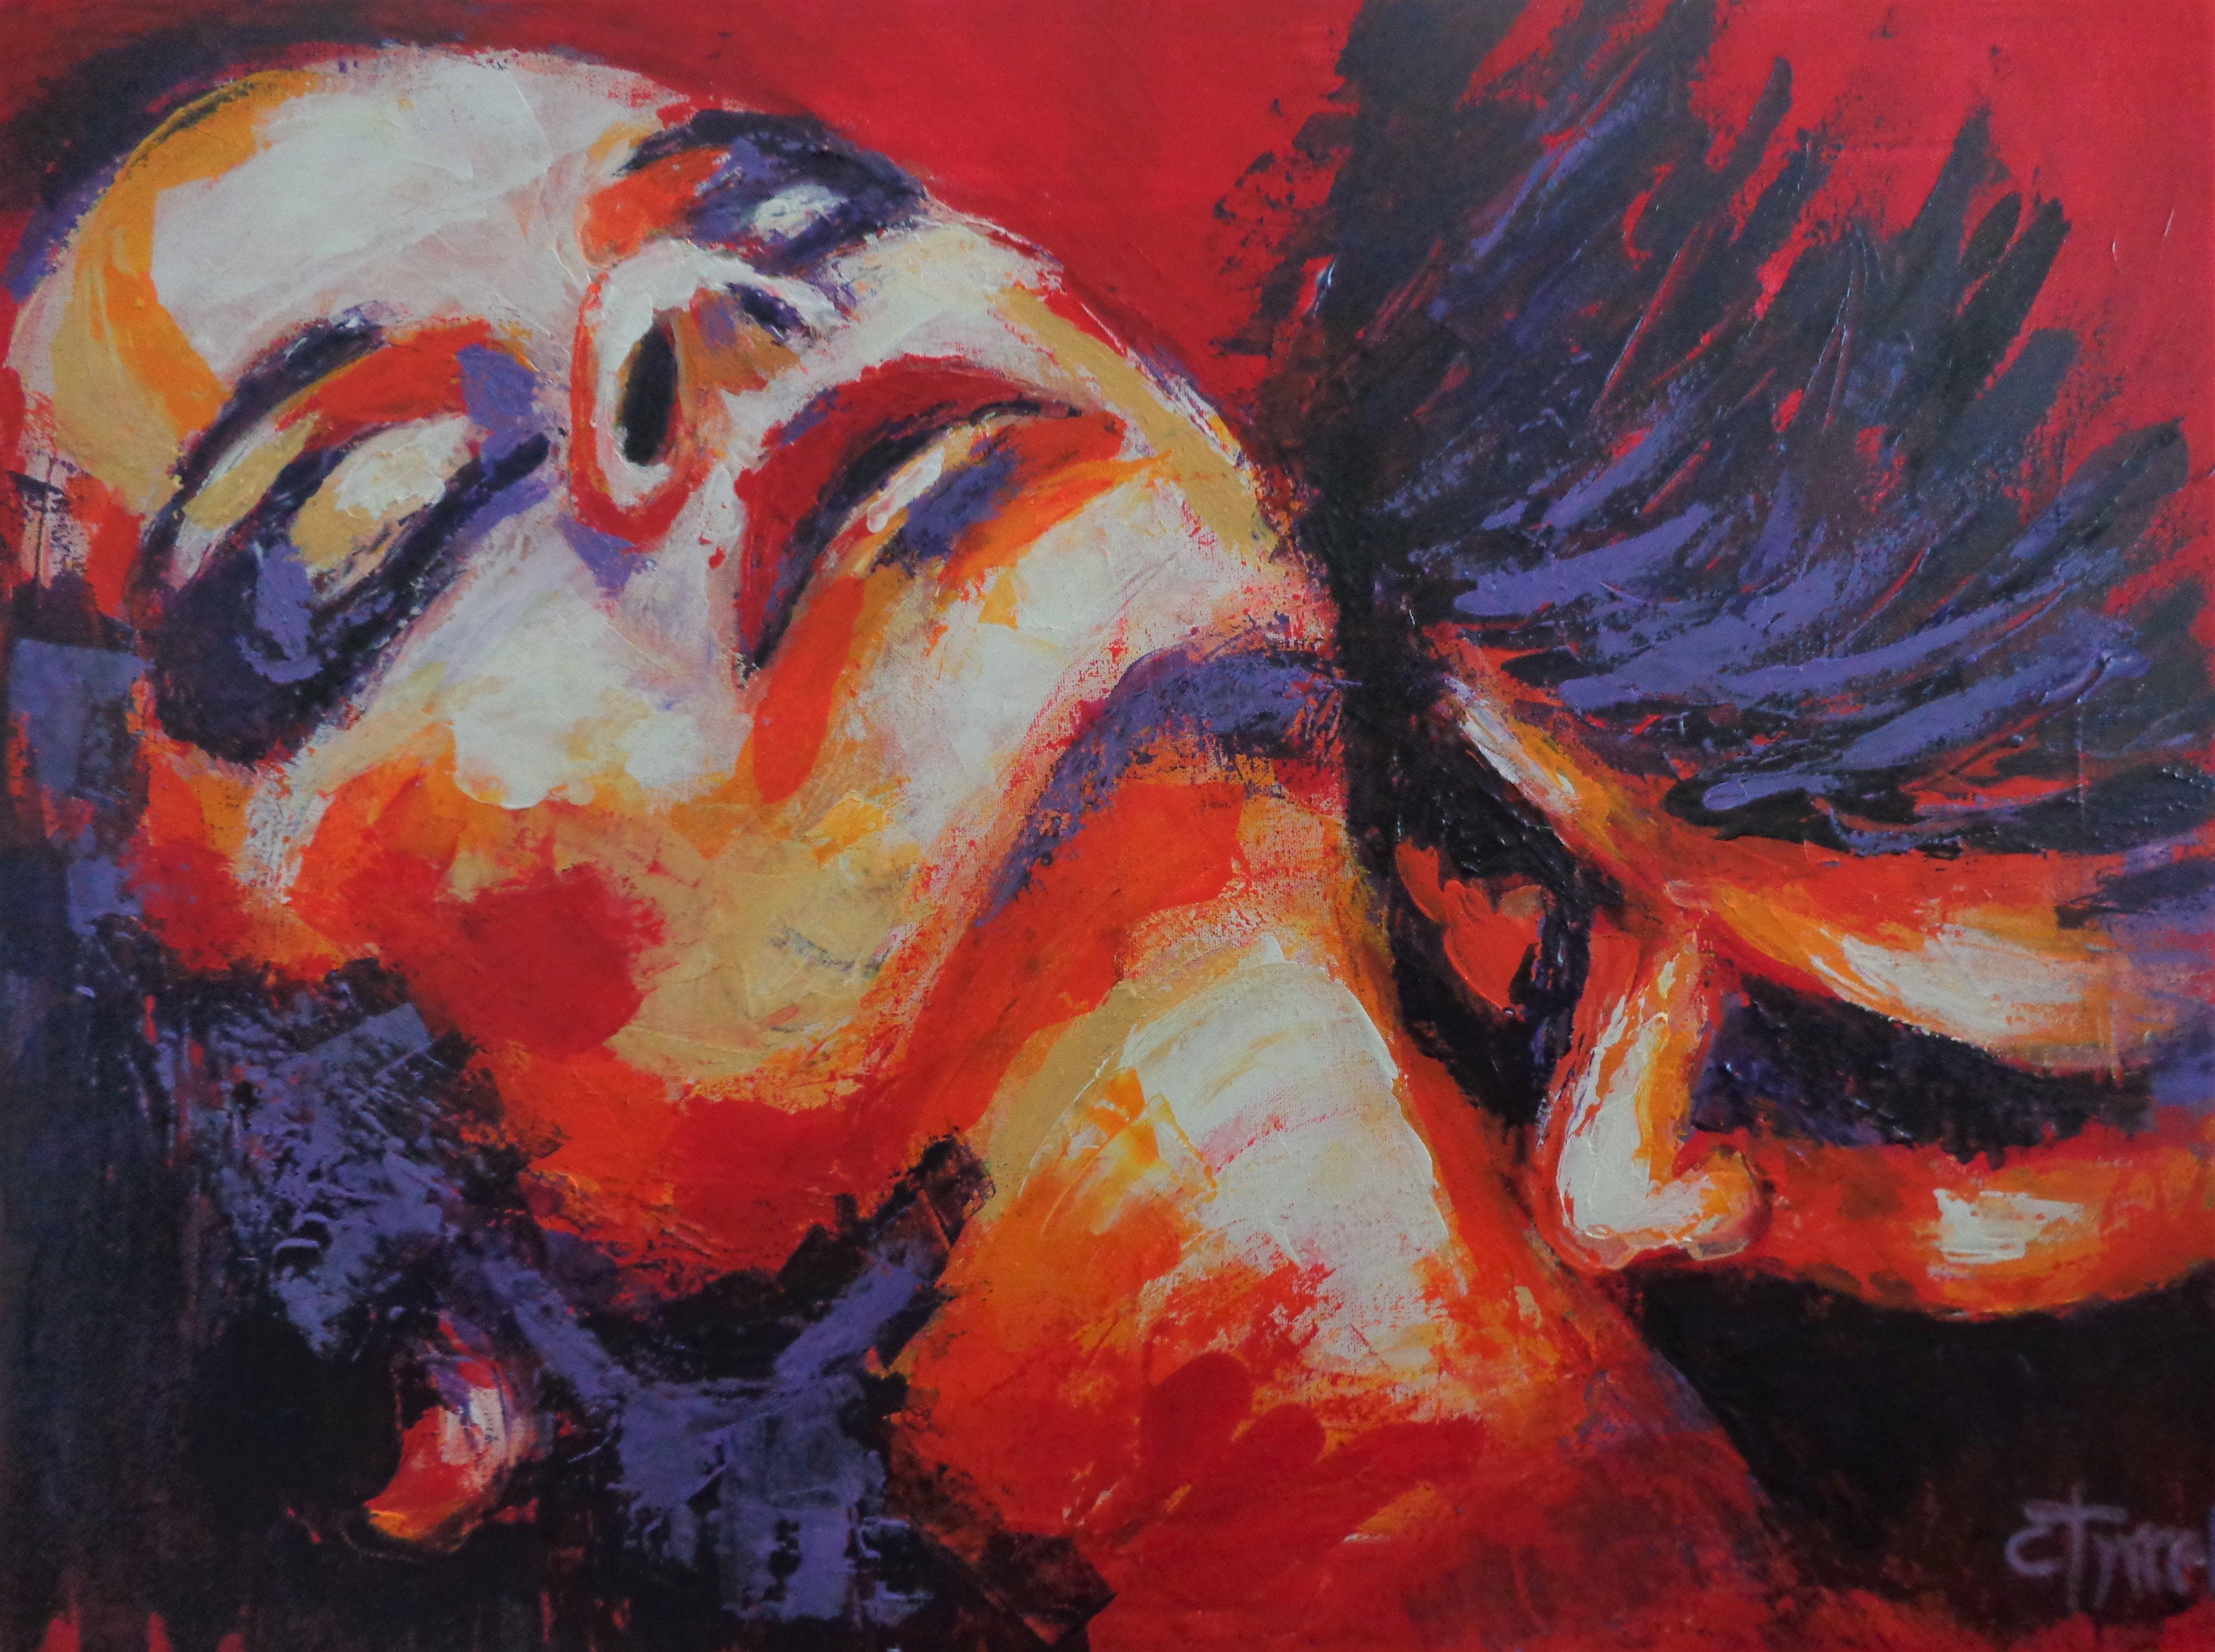 Original contemporary figurative acrylics painting on canvas, painted edges and ready to hang. Frame is optional. Part of a series of romantic and sensual lovers close-up portrait in red main colour. Colourful and textured painting using the palette